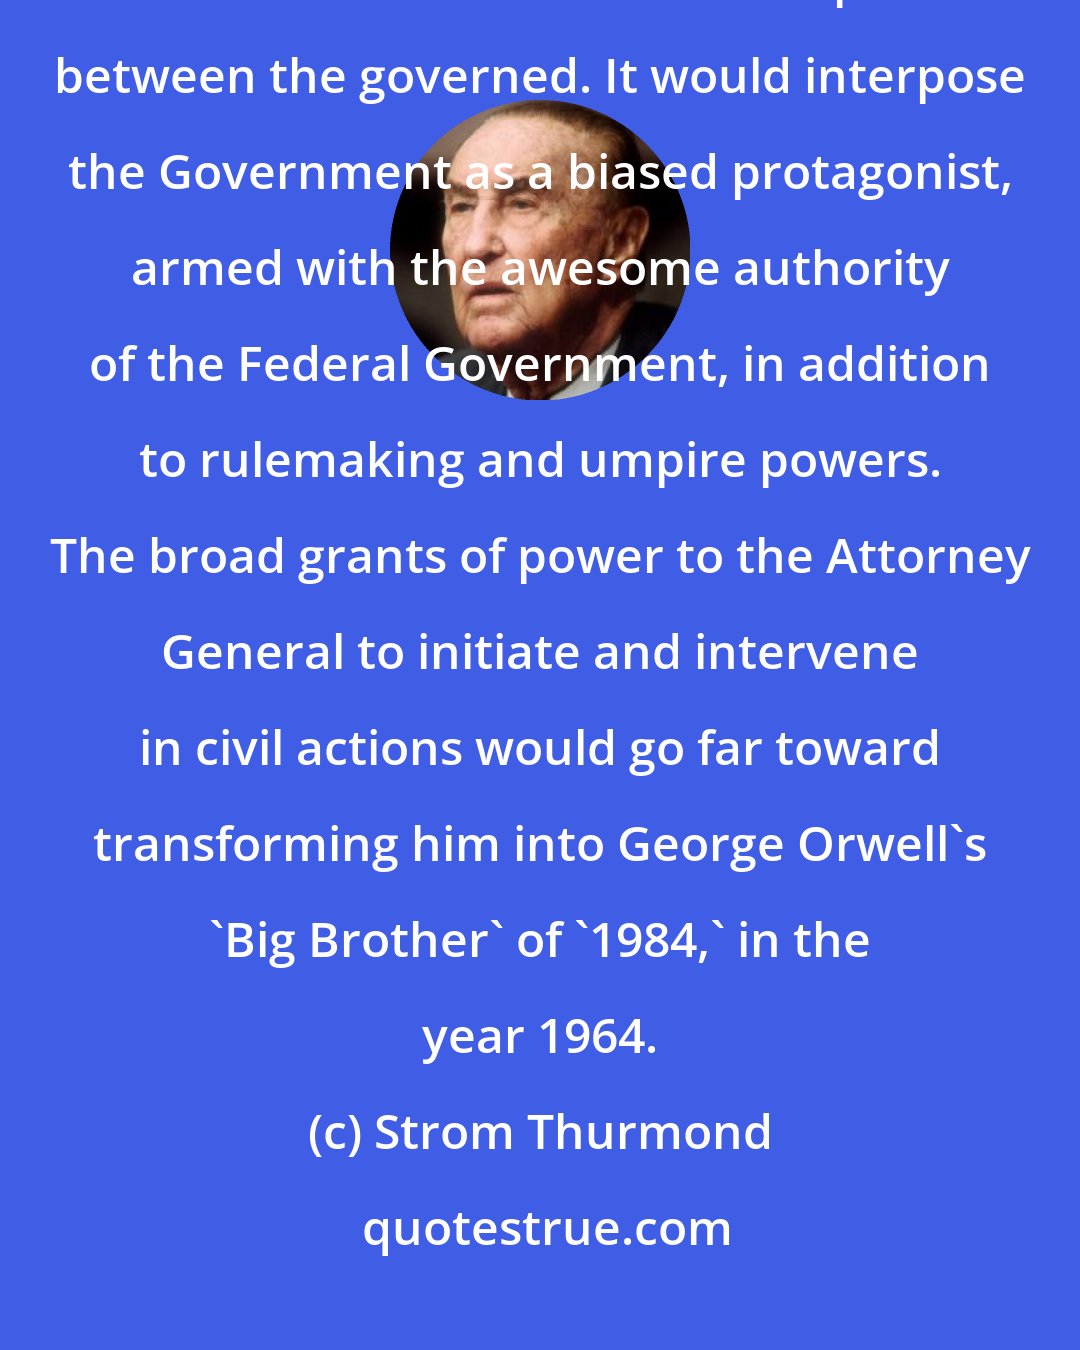 Strom Thurmond: This bill would renounce the safe, proper, and acceptable role for Government as a referee of disputes between the governed. It would interpose the Government as a biased protagonist, armed with the awesome authority of the Federal Government, in addition to rulemaking and umpire powers. The broad grants of power to the Attorney General to initiate and intervene in civil actions would go far toward transforming him into George Orwell's 'Big Brother' of '1984,' in the year 1964.